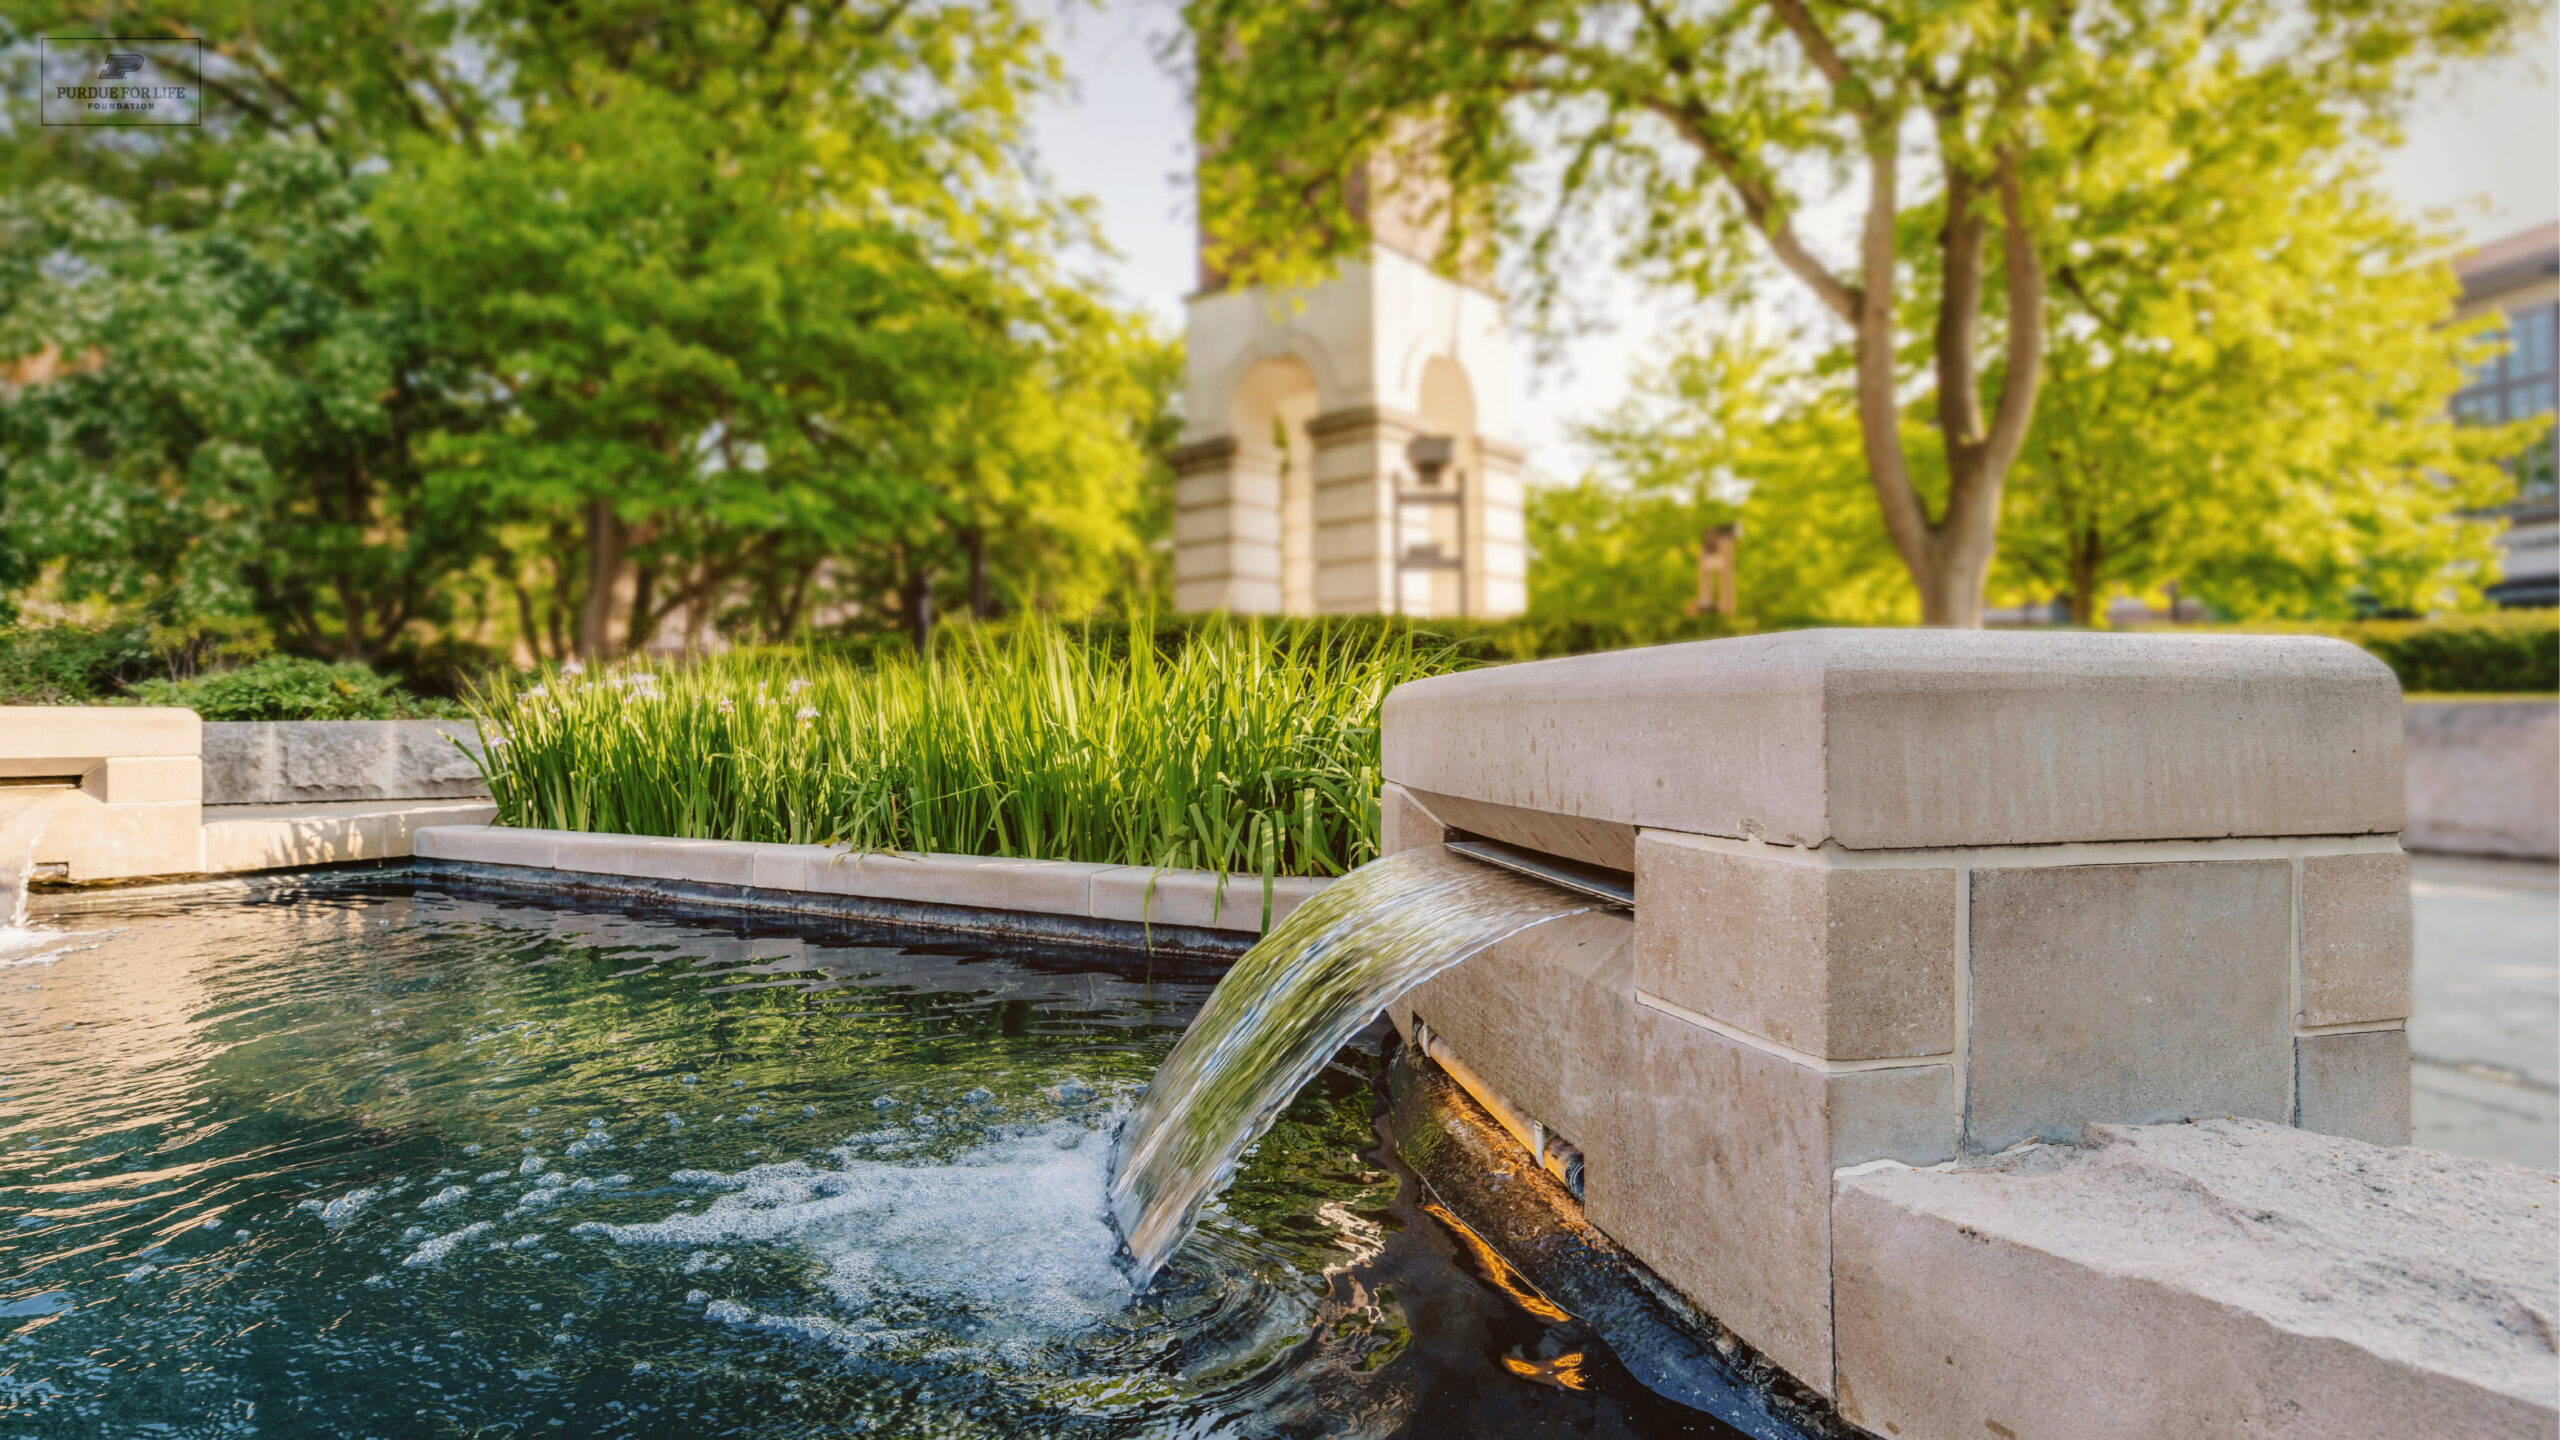 Image showing an outdoor water fountain on Purdue's campus.